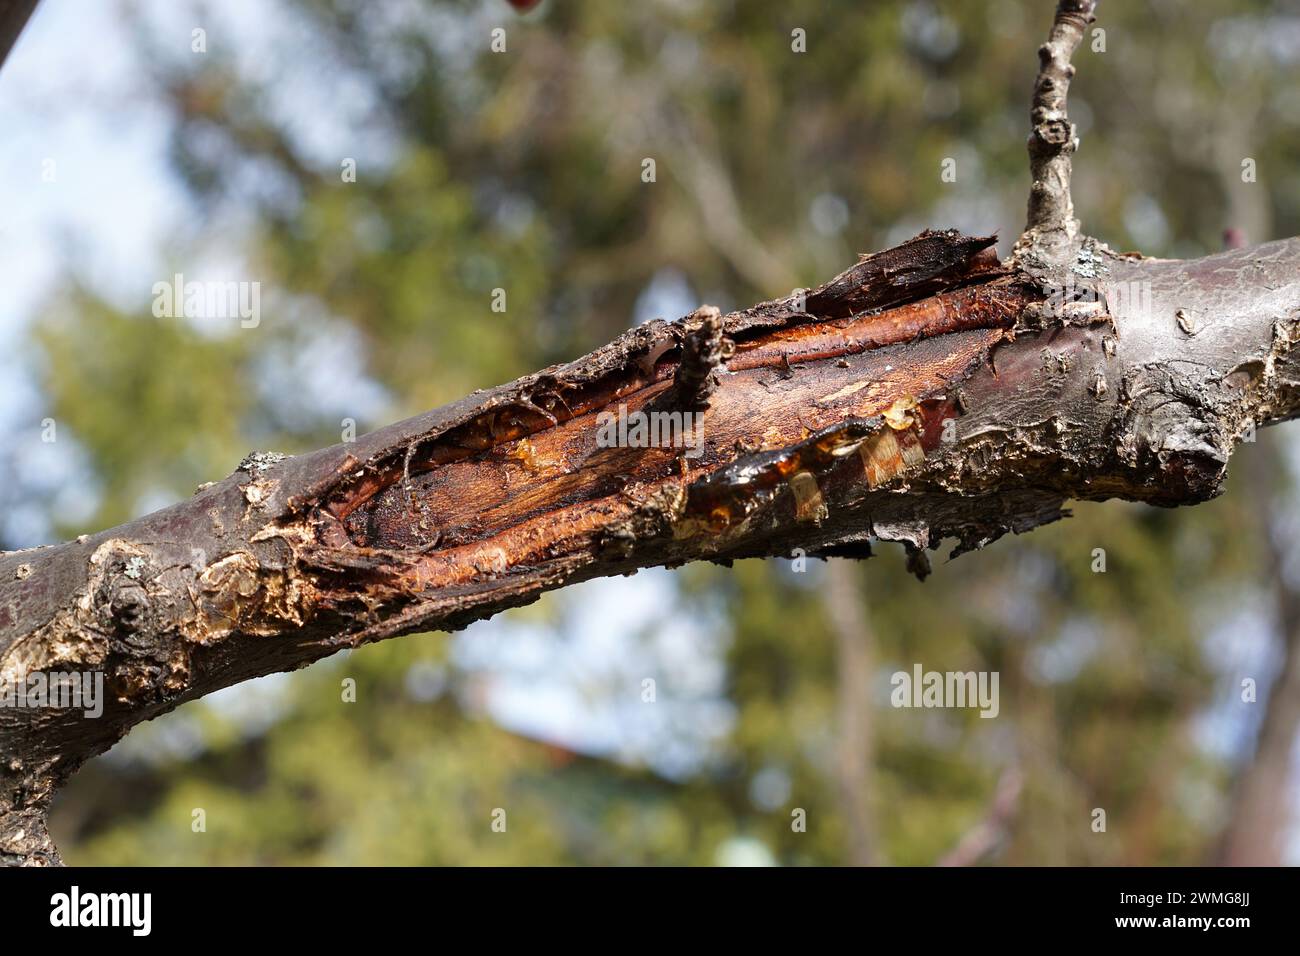 Signs of monilinia disease with gum flow on an apricot tree branch Stock Photo